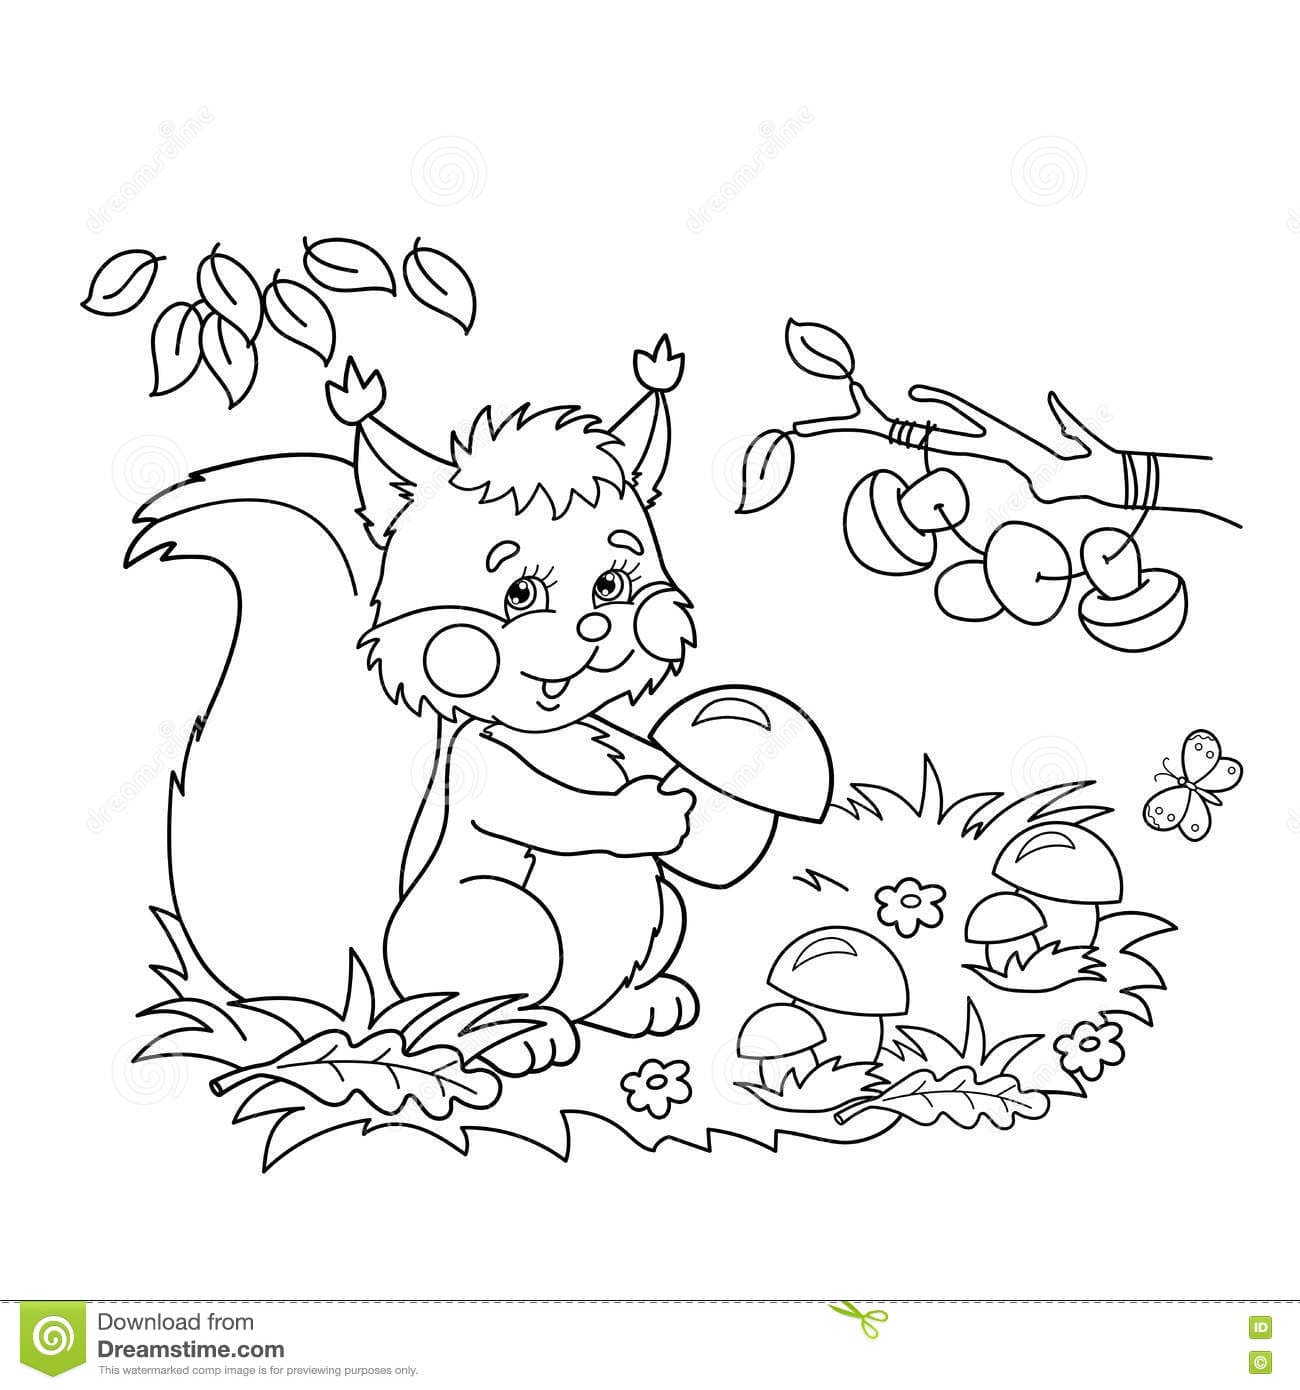 Coloring Page Outline Of Cartoon Squirrel With Mushrooms In The Meadow With Butterflies